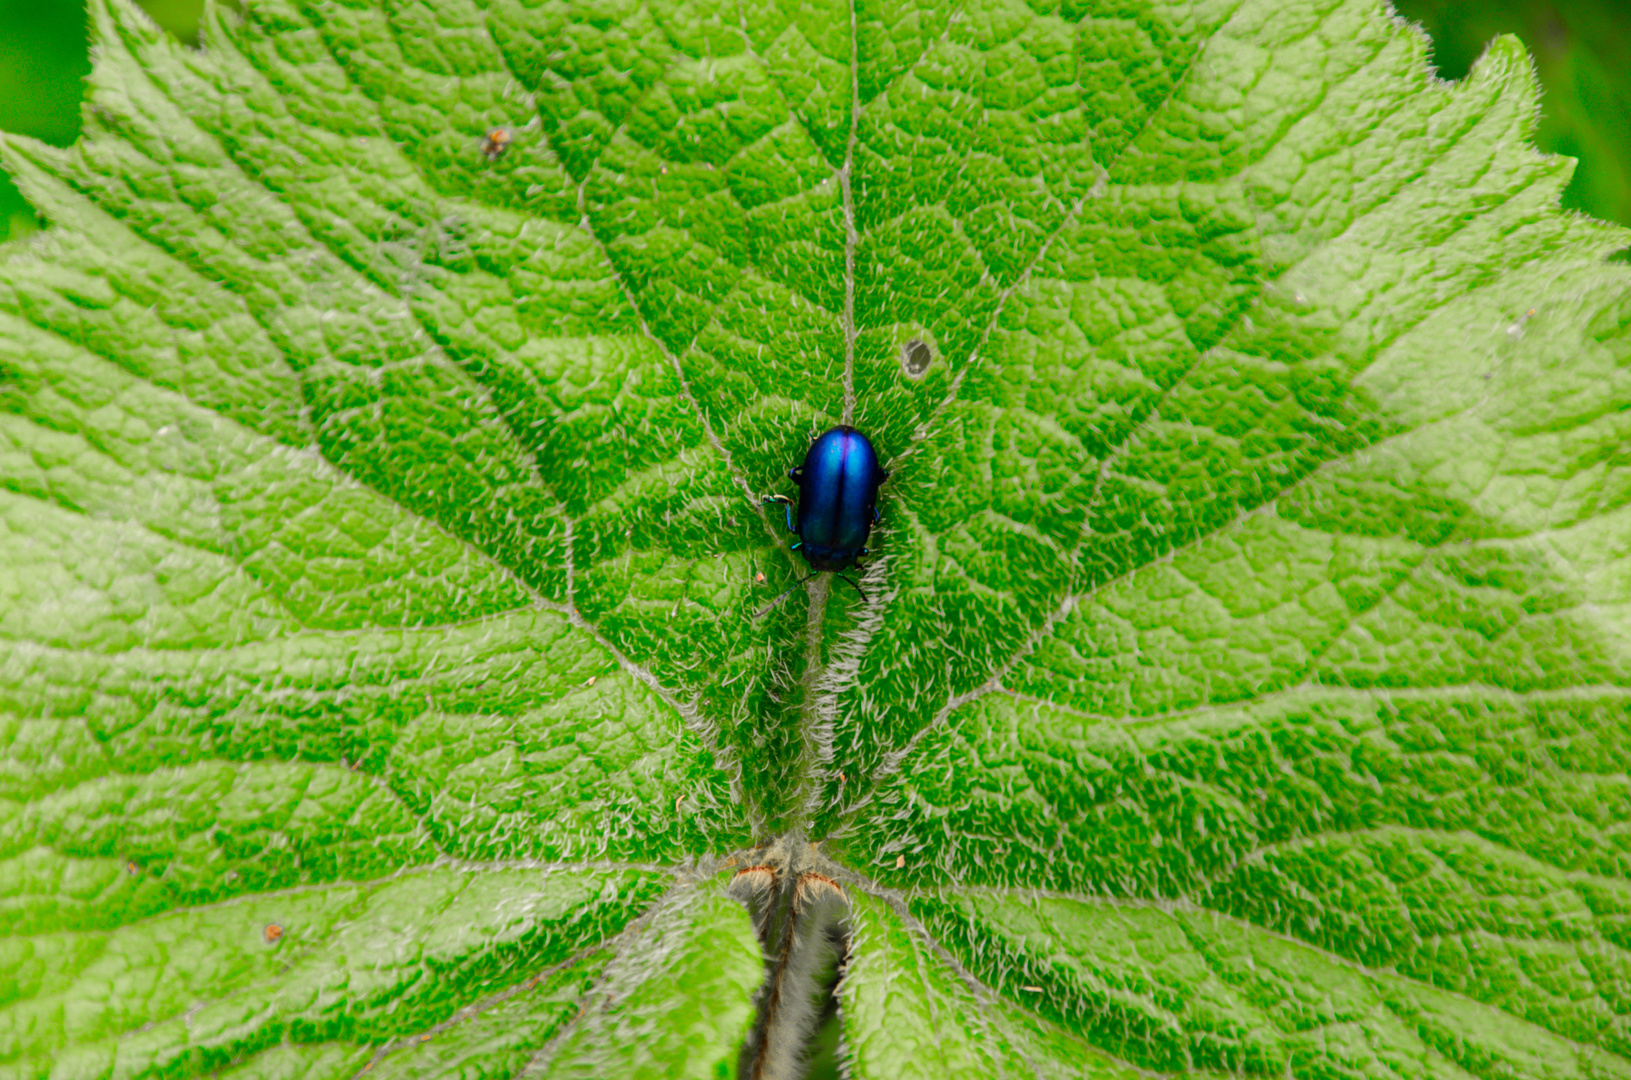 The blue bug on the green leave